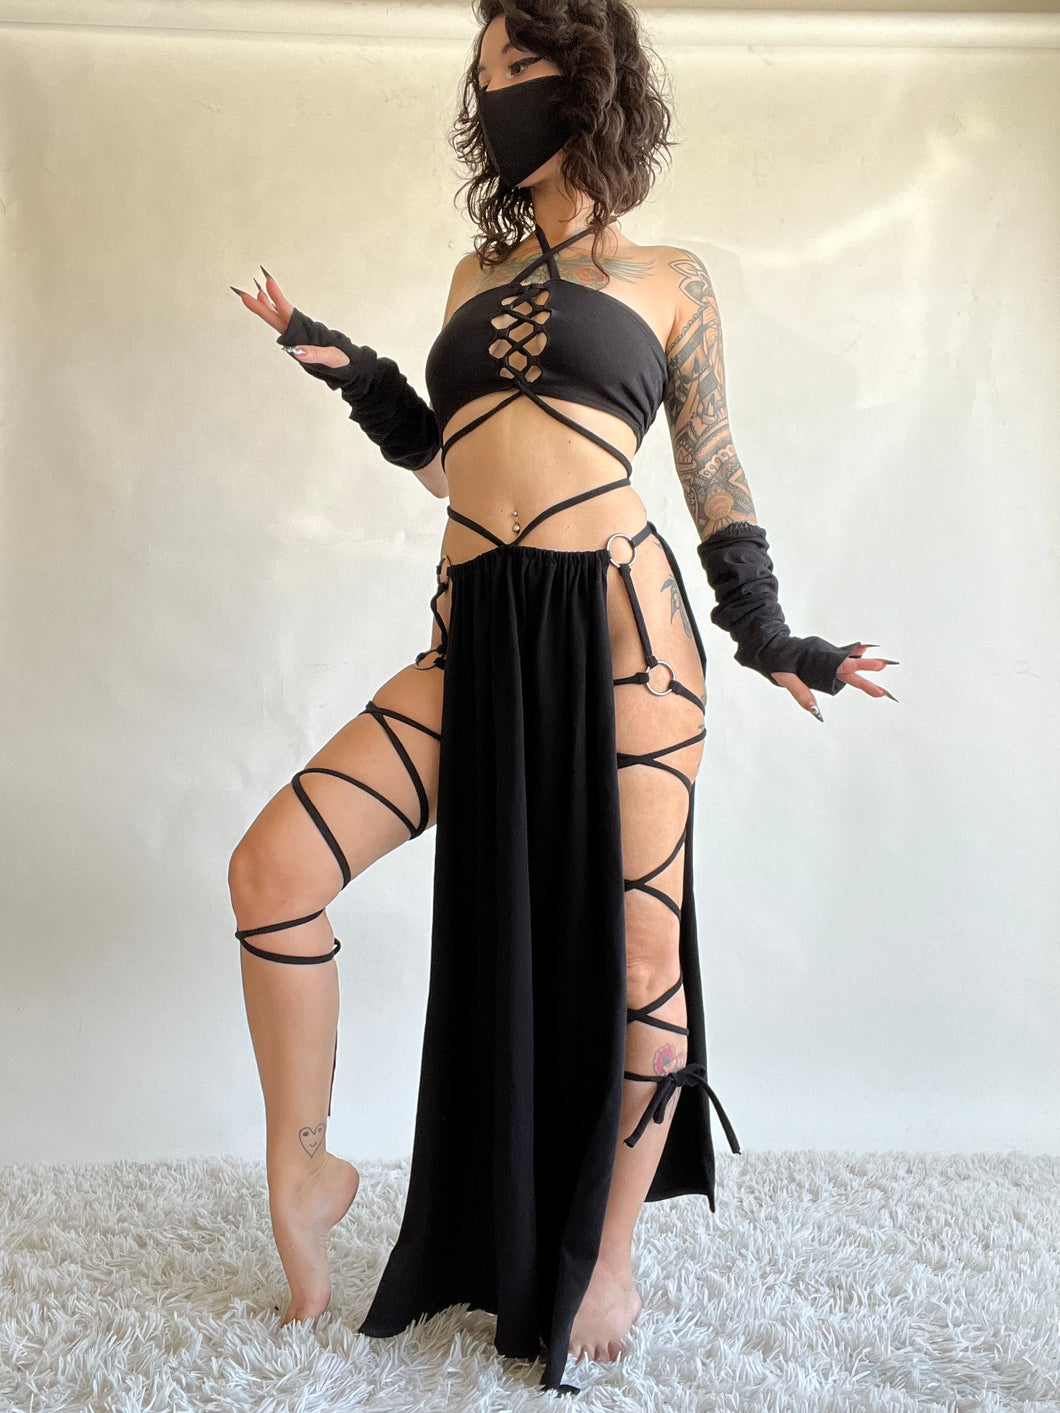 Serpentina Set in Black Cotton - 3 pieces (Skirt, Top and Gloves) - Fire Safe Bellydance Costume